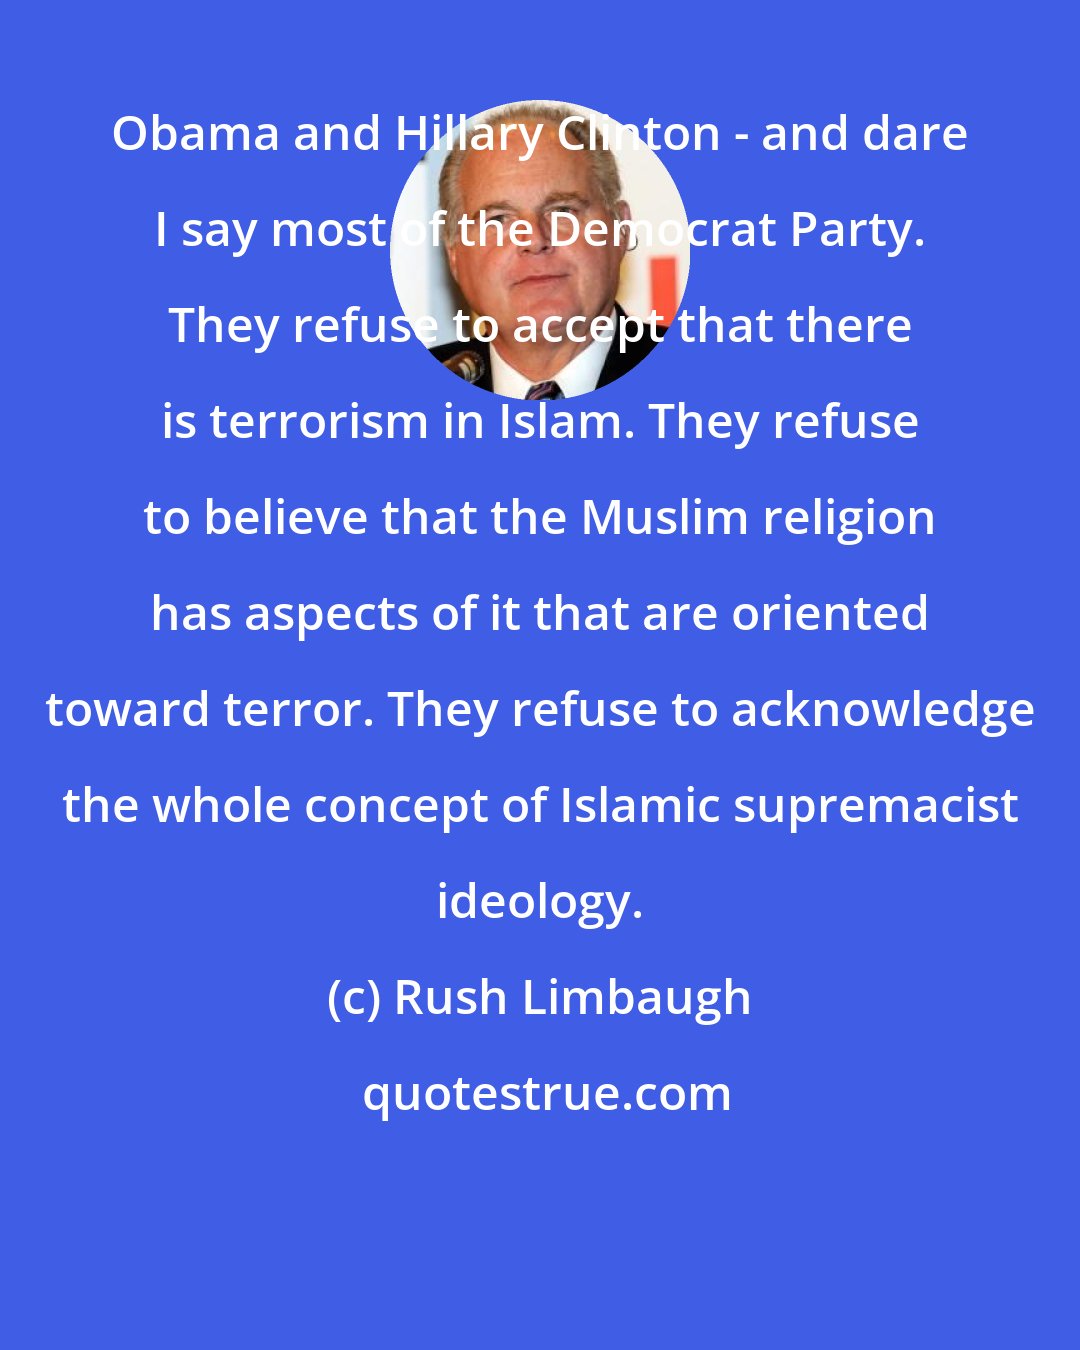 Rush Limbaugh: Obama and Hillary Clinton - and dare I say most of the Democrat Party. They refuse to accept that there is terrorism in Islam. They refuse to believe that the Muslim religion has aspects of it that are oriented toward terror. They refuse to acknowledge the whole concept of Islamic supremacist ideology.